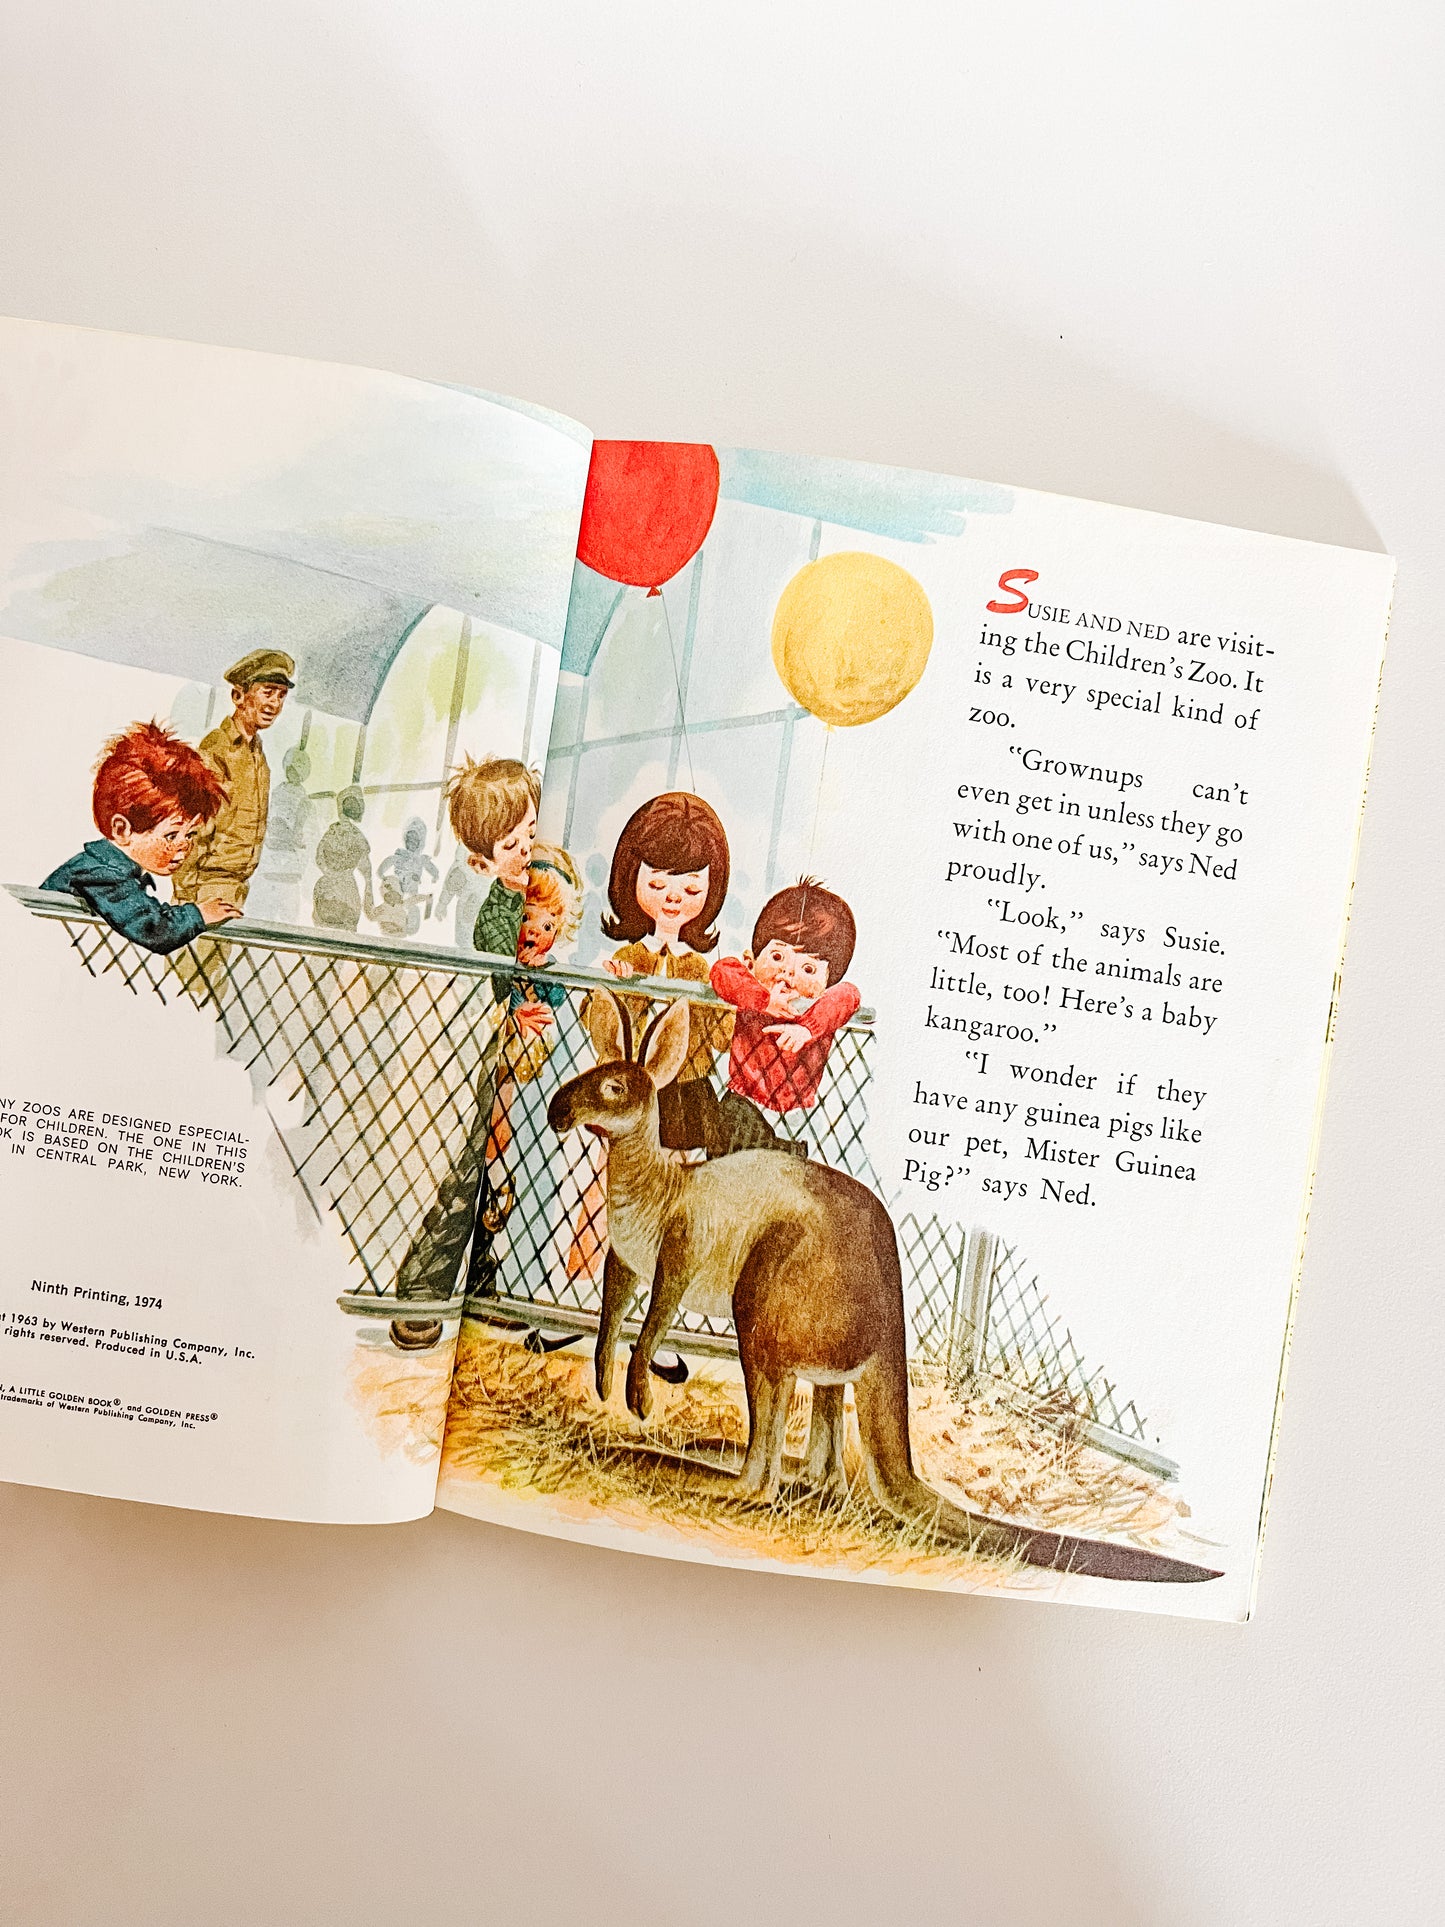 Little Golden Book “A Visit to the Children’s Zoo”